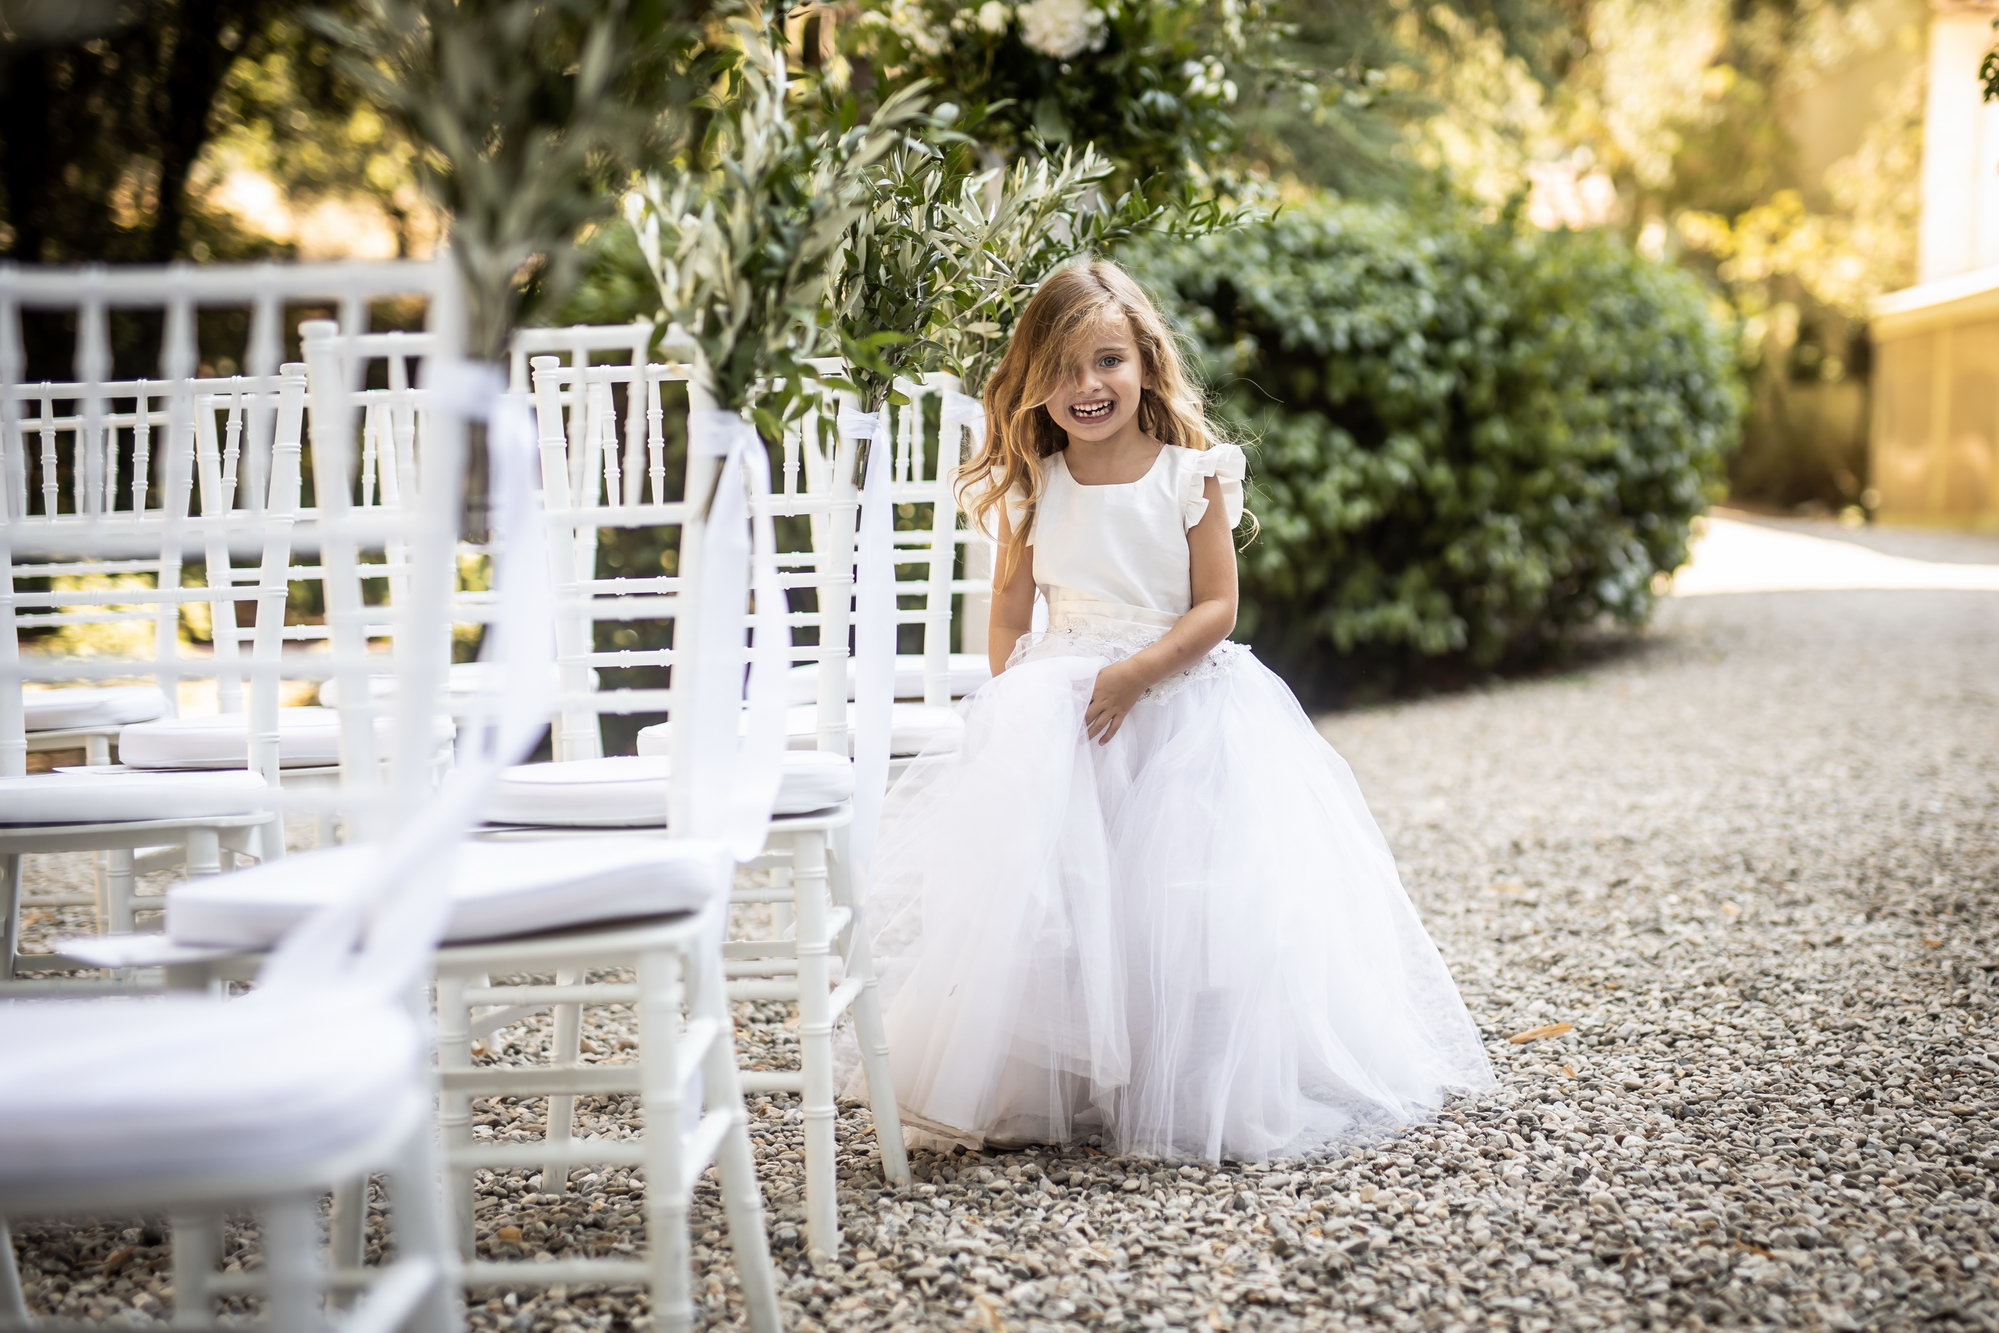 ..imagesweddings enthe dream of getting married in Italy wedding photographers photo27_044 by Photo27